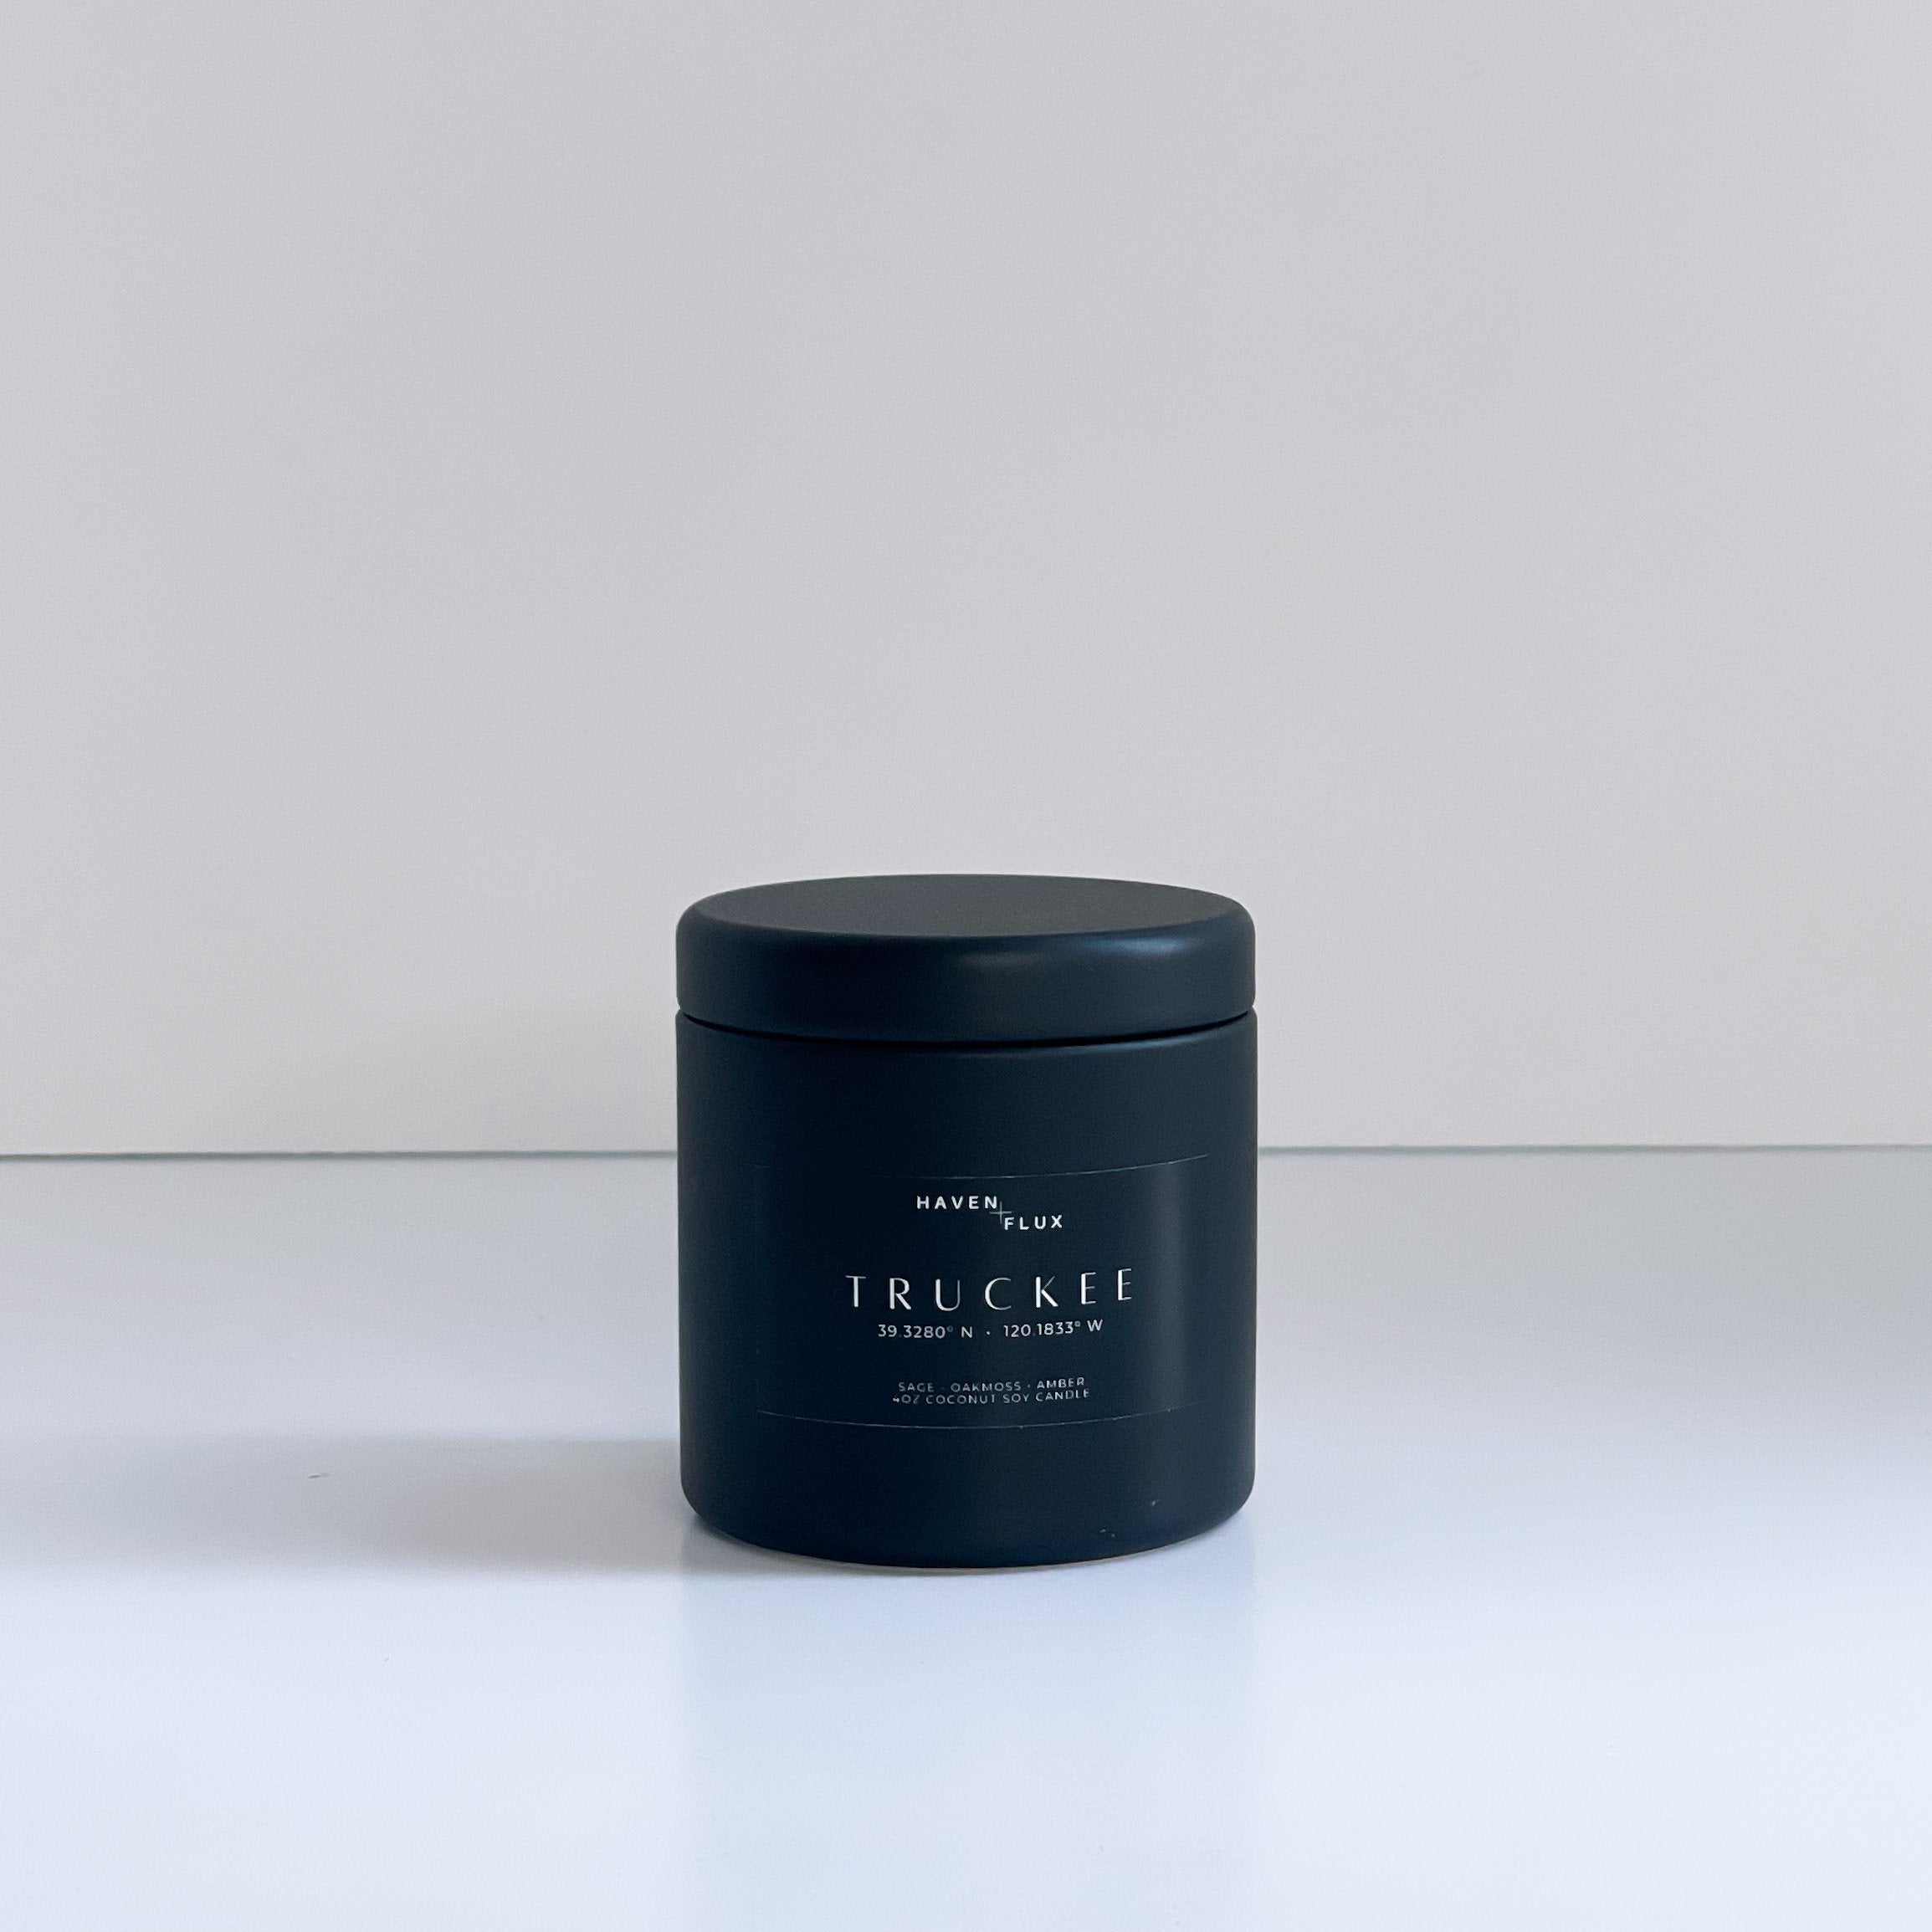 TRUCKEE 4OZ TRAVEL CANDLE